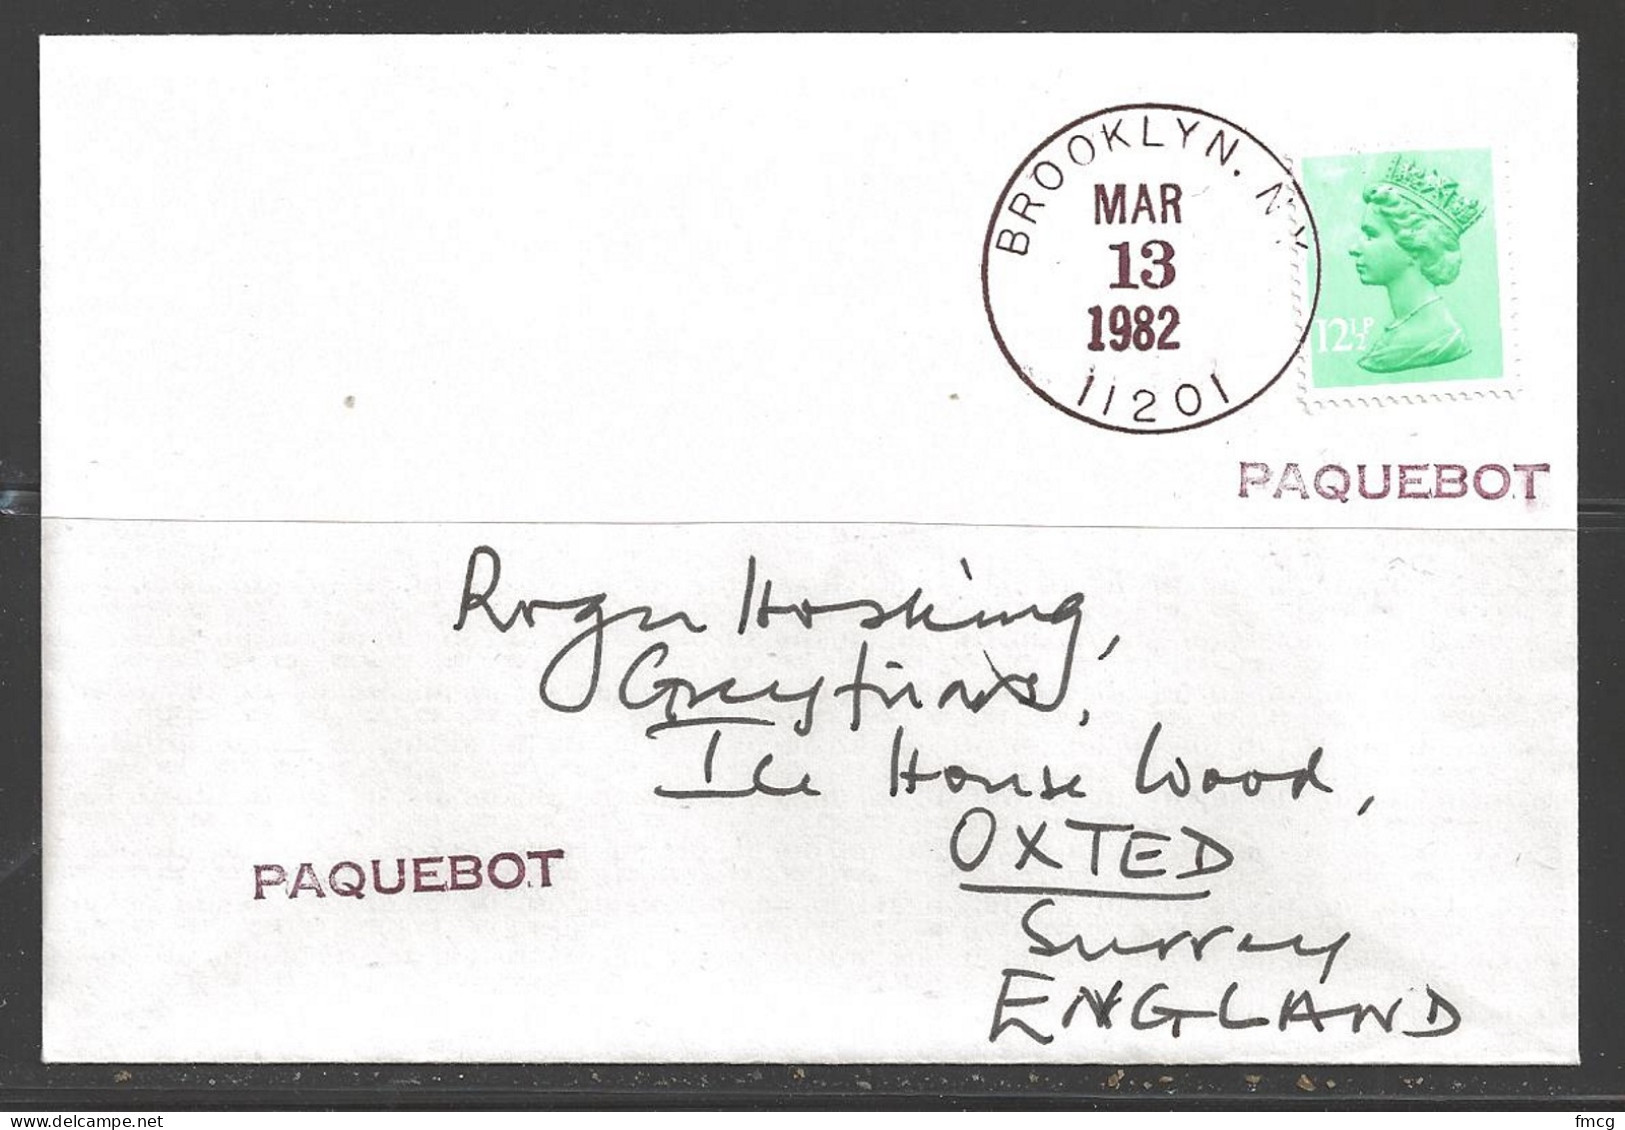 1982 Paquebot Cover, British Stamp Used In Brooklyn New York (Mar 13) - Briefe U. Dokumente